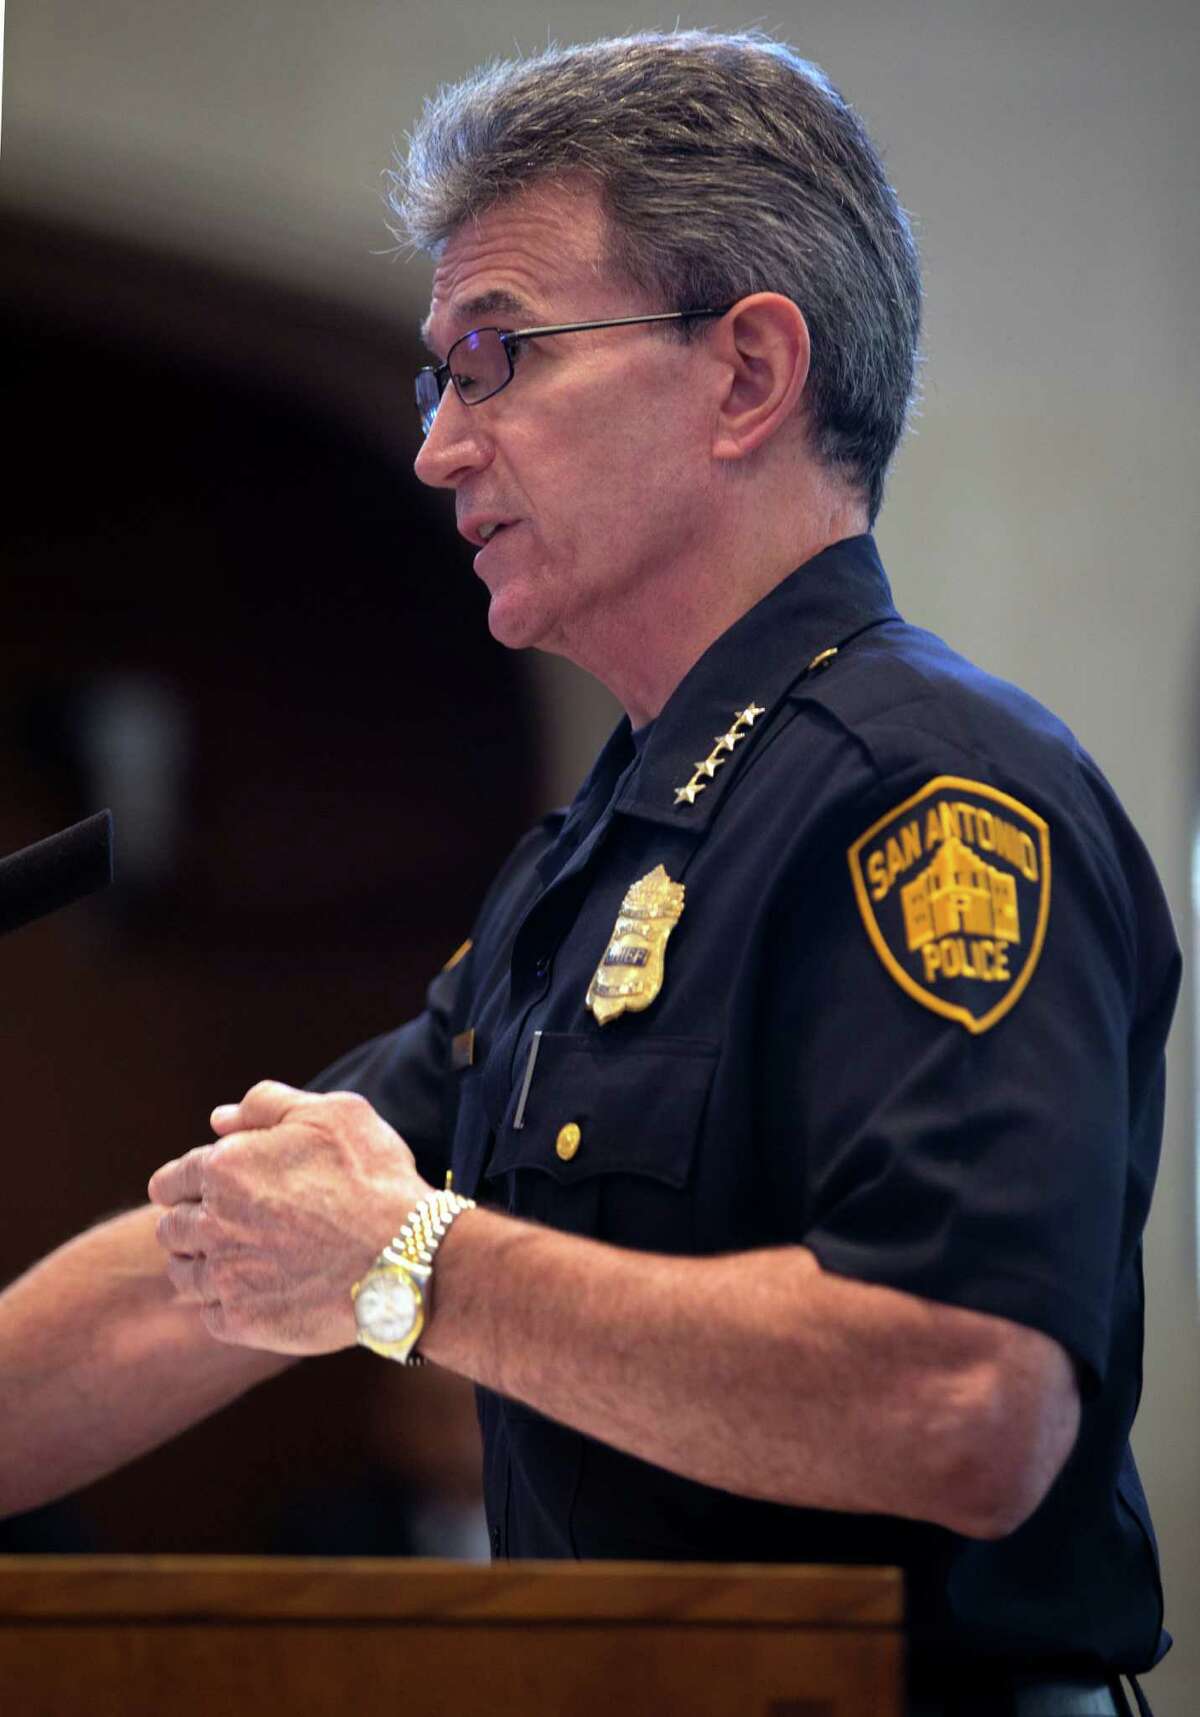 San Antonio police chief William McManus speaks to the city council Thursday morning, Oct. 29, 2015 about police body-worn cameras in advance of the council's unanimous vote to enter into a multi-year contract to equip most officers with the devices.